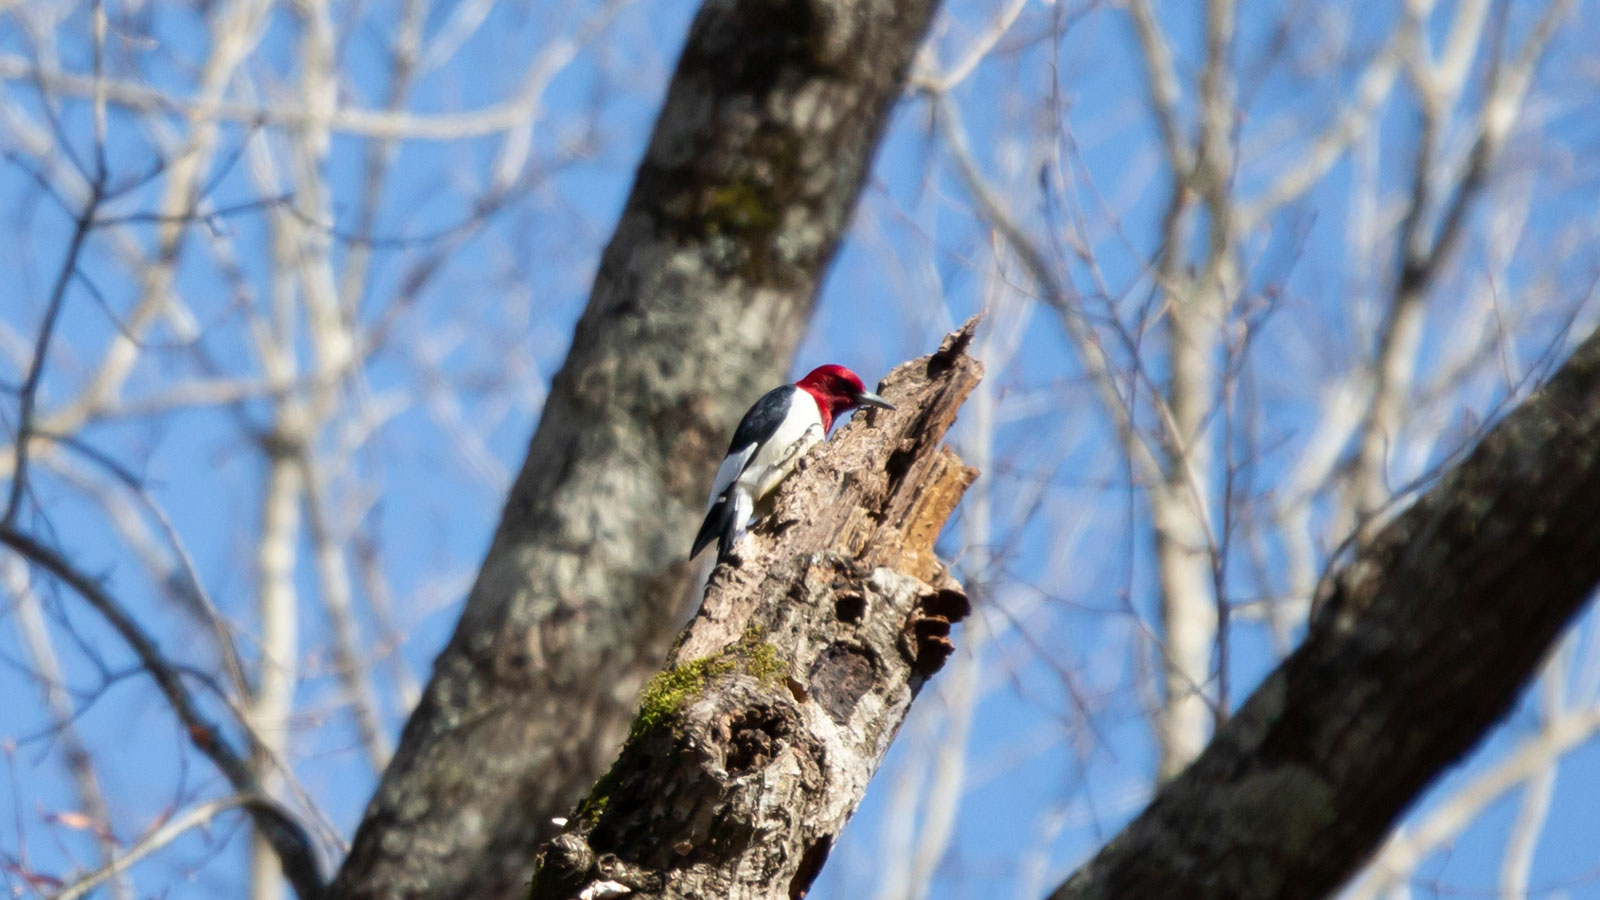 Mature red-headed woodpecker foraging for insects on a large, broken, dying tree trunk